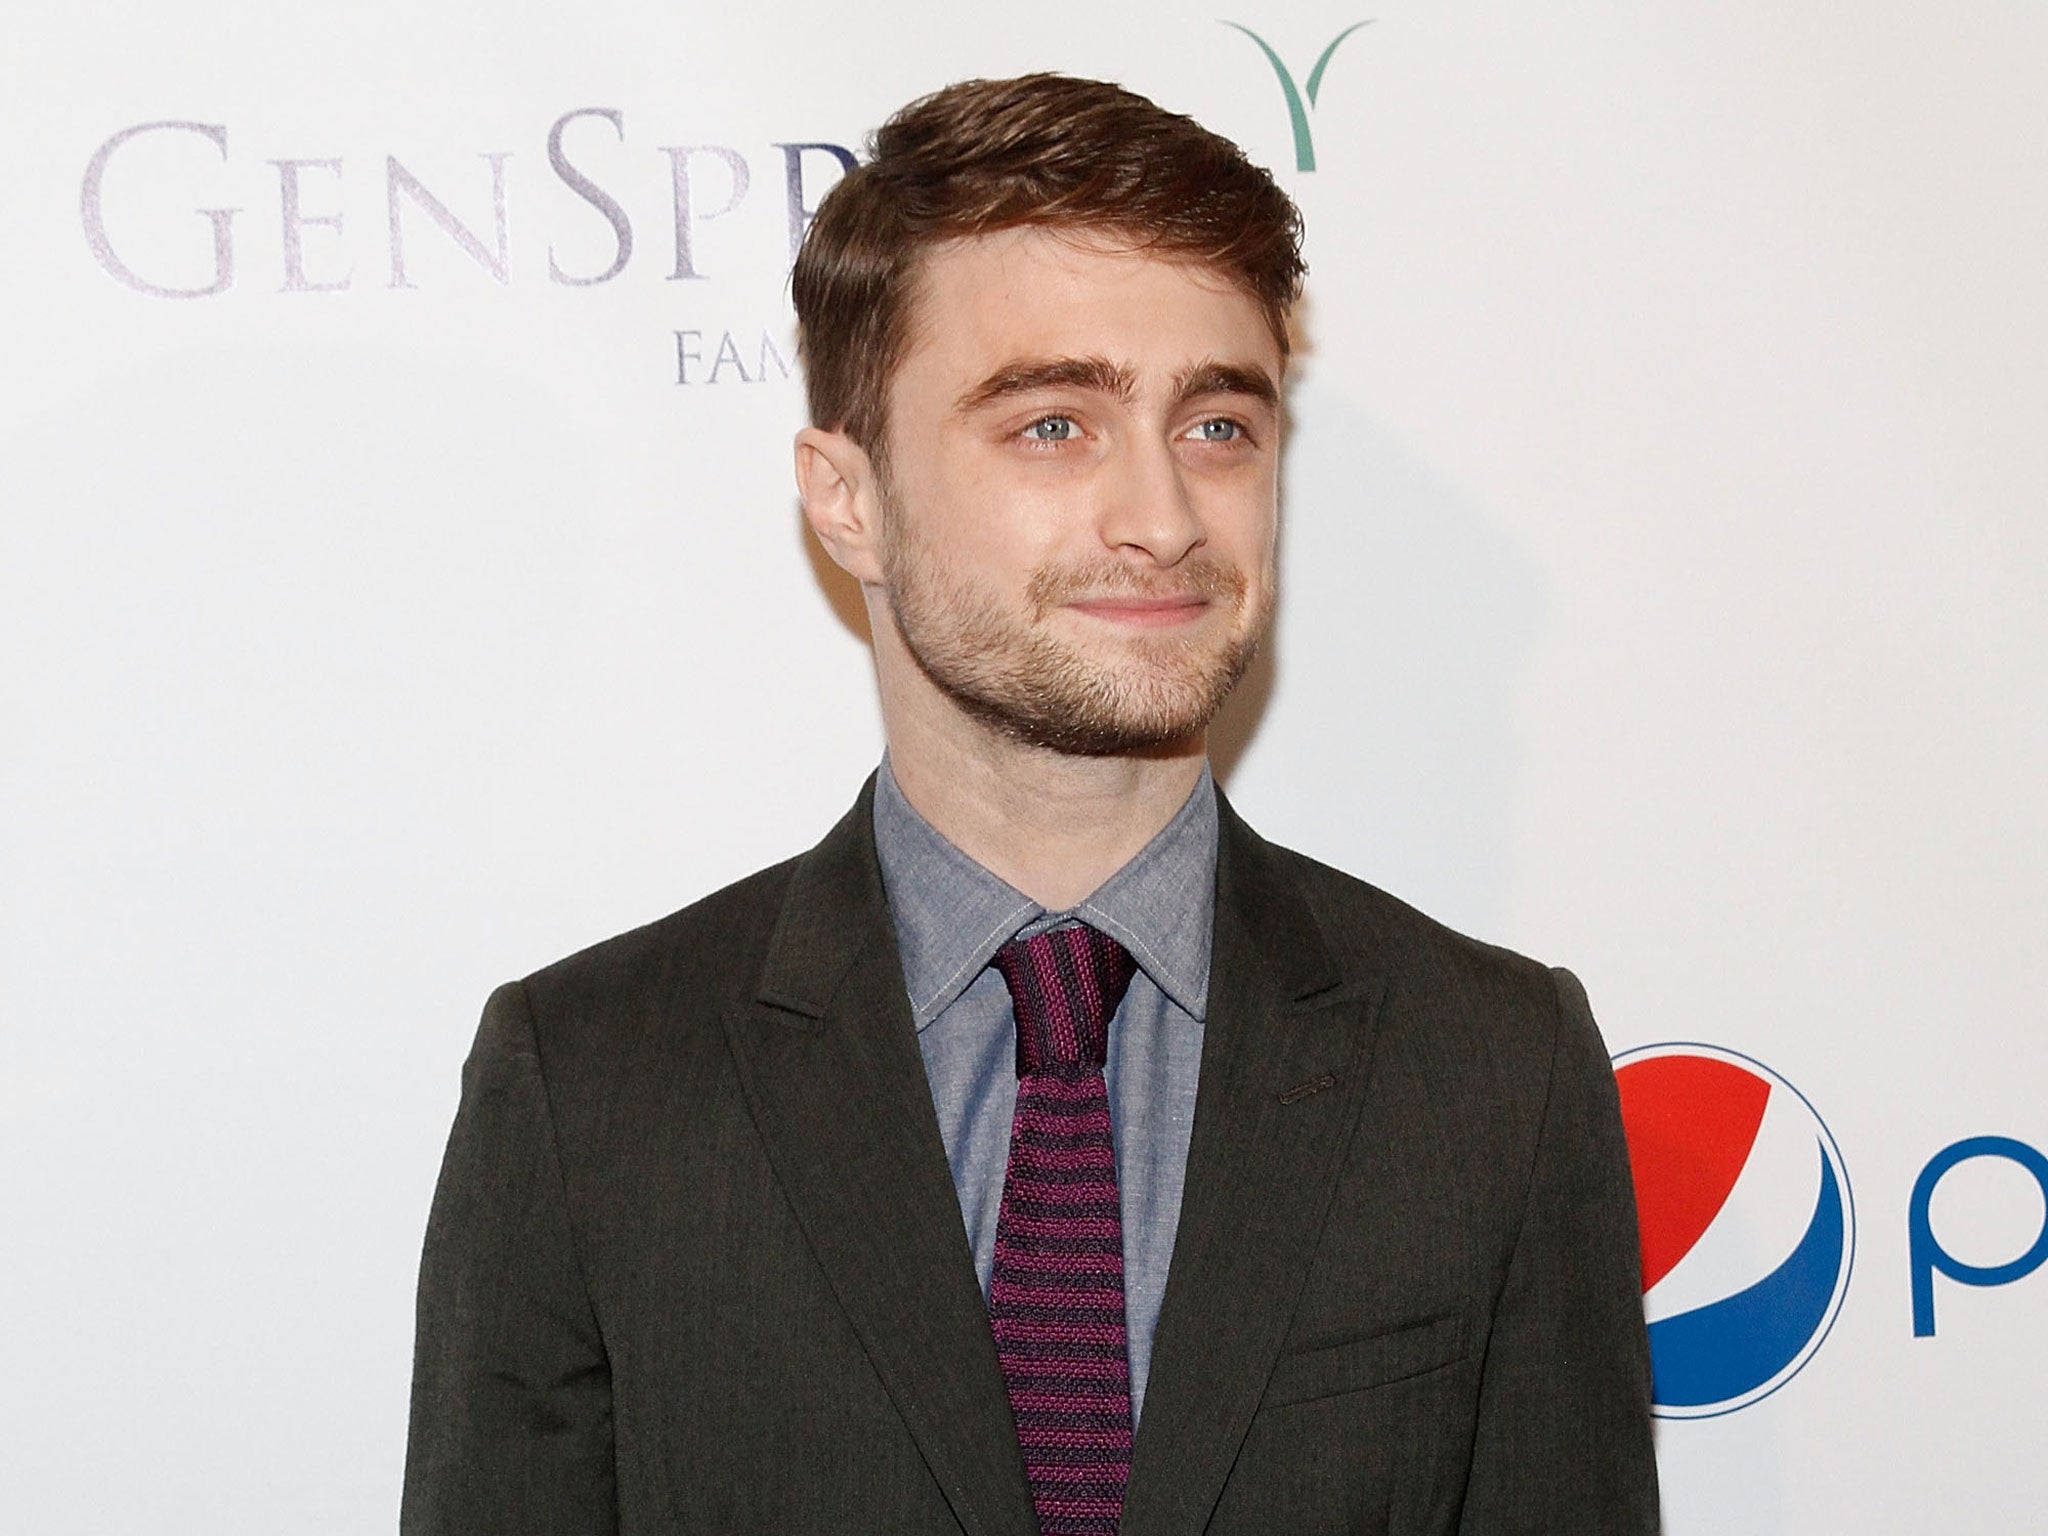 Daniel Radcliffe attends the 80th Annual Drama League Awards Ceremony and Luncheon at Marriot Marquis Times Square on 16 May, 2014, in New York City